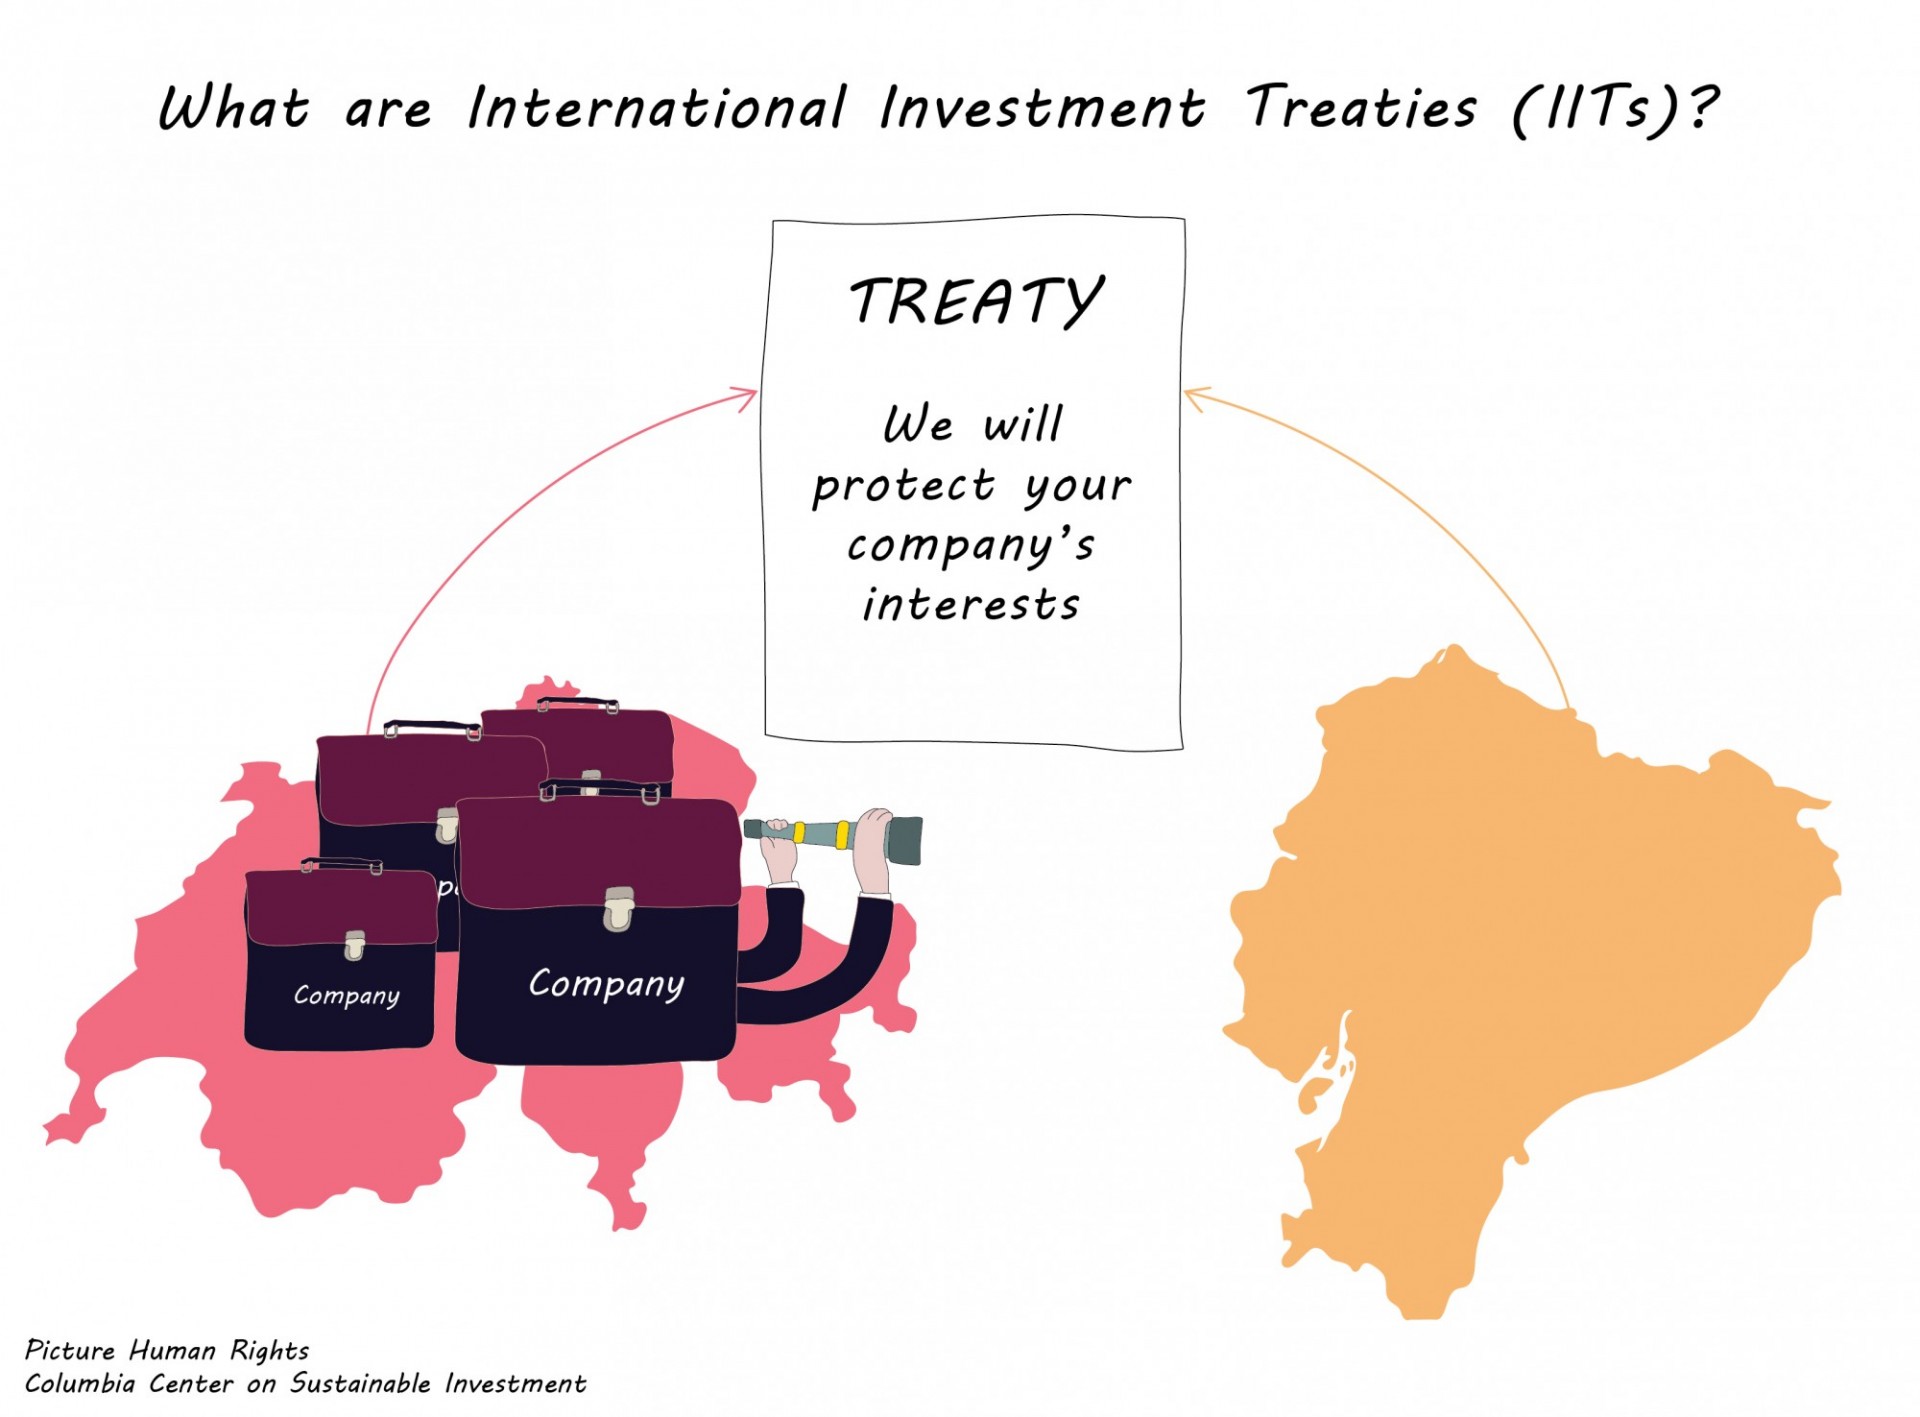 Graphic titled "What are International Investment Treats (IITs) with two countries facing each other and a box of text between them labeled "TREATY: We will protect your company's interests."